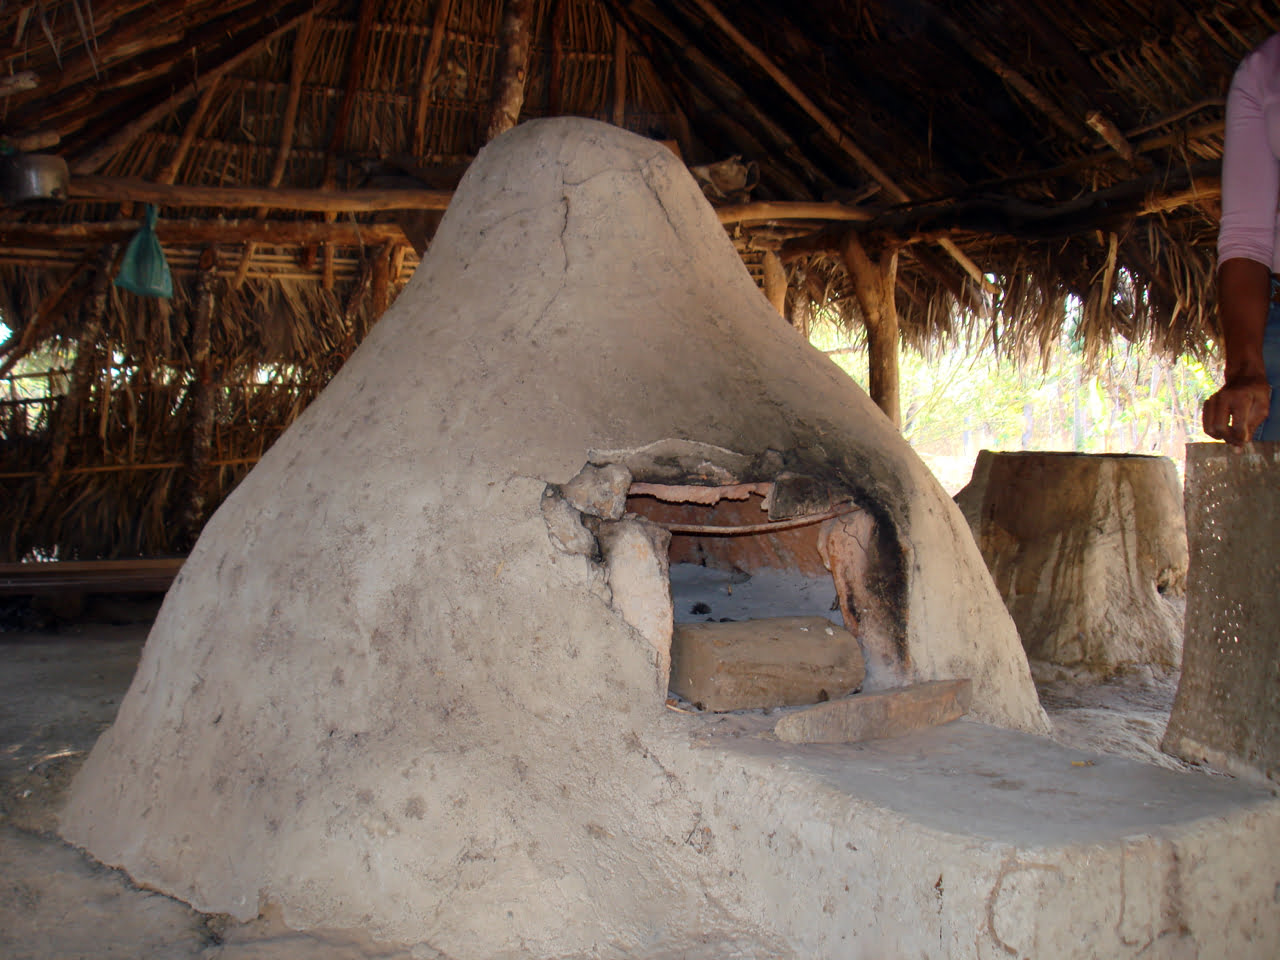 Mud ovens for baking bread or drying large bundles of roots. 